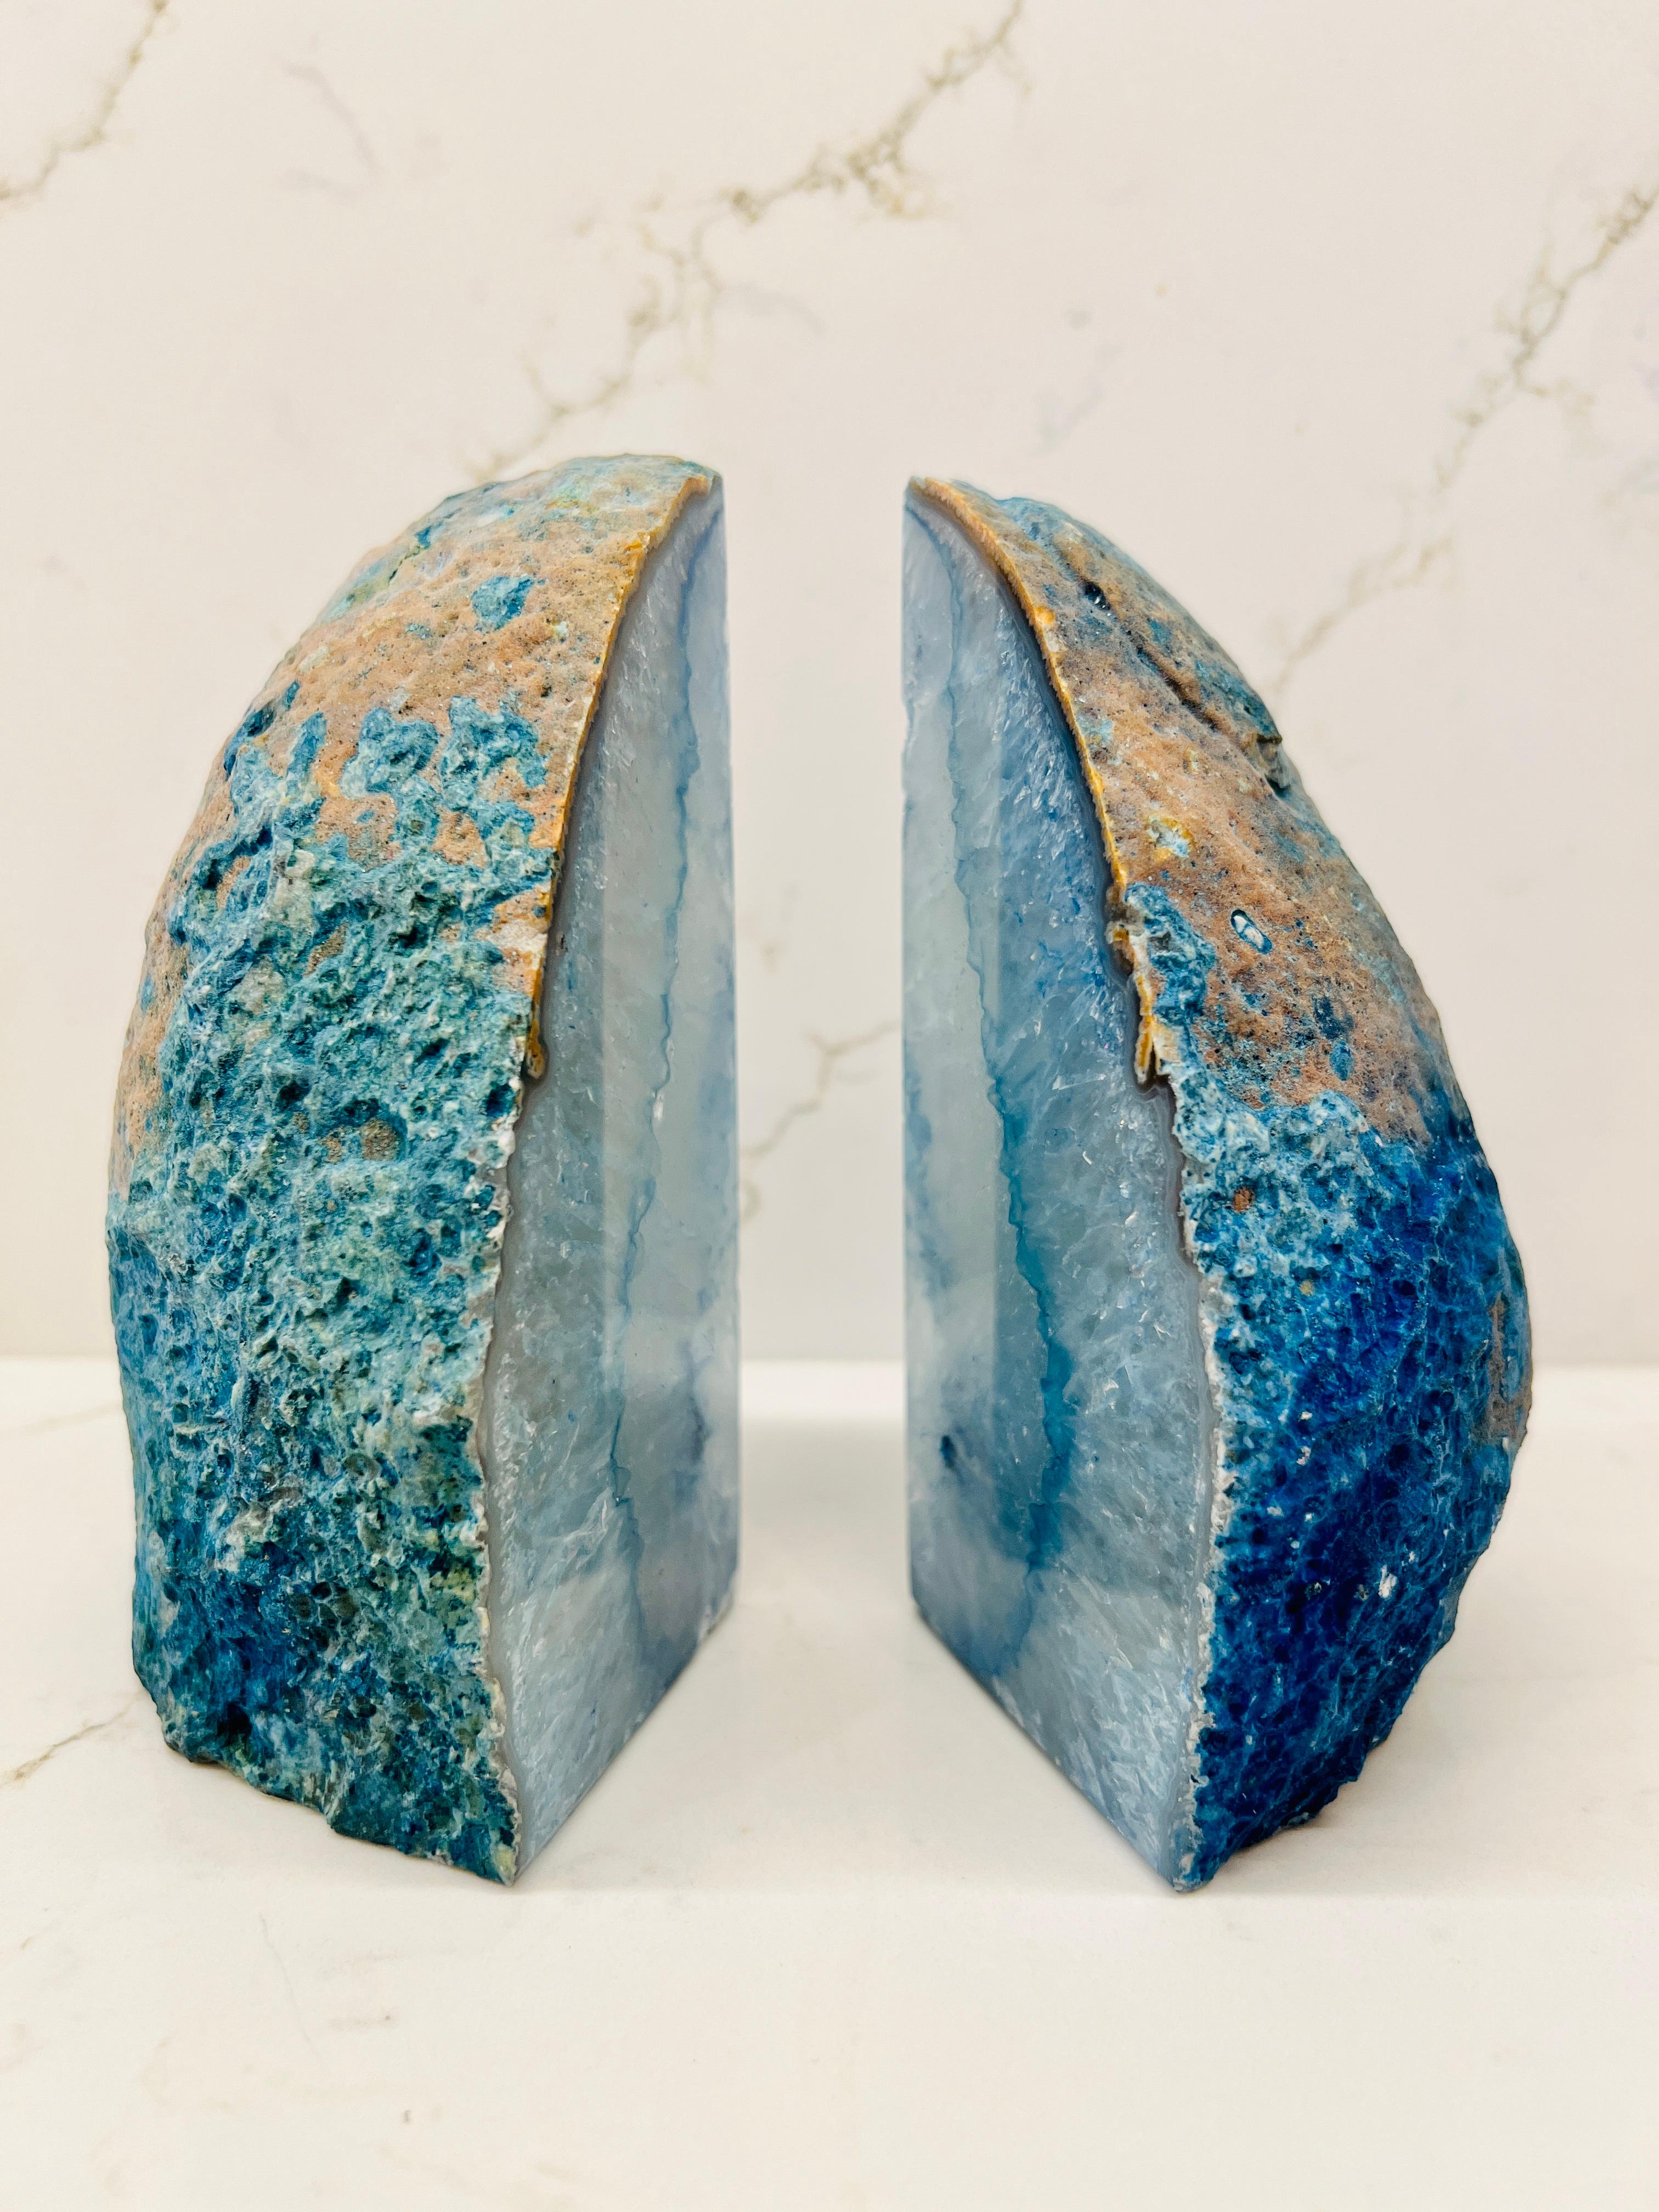 Pair of Quartz Crystal Geode Bookends in Blue and White In Good Condition For Sale In Fort Lauderdale, FL